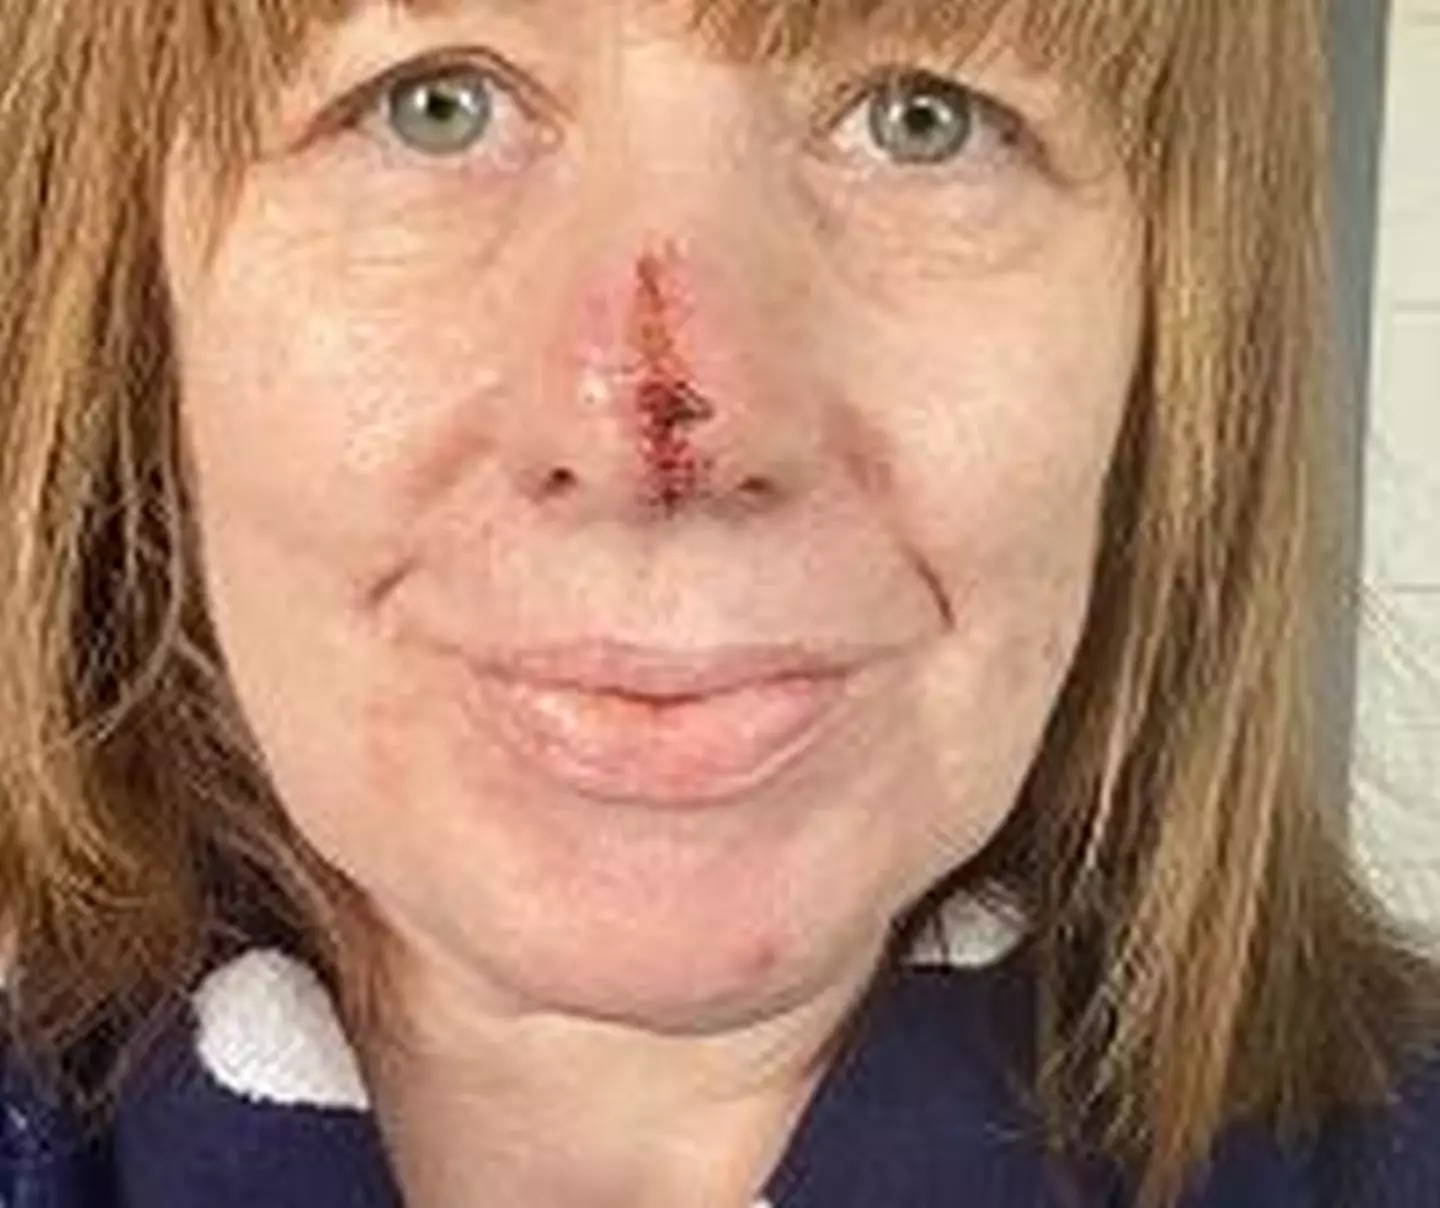 Sarah had a three centimetre chunk of her nose removed.